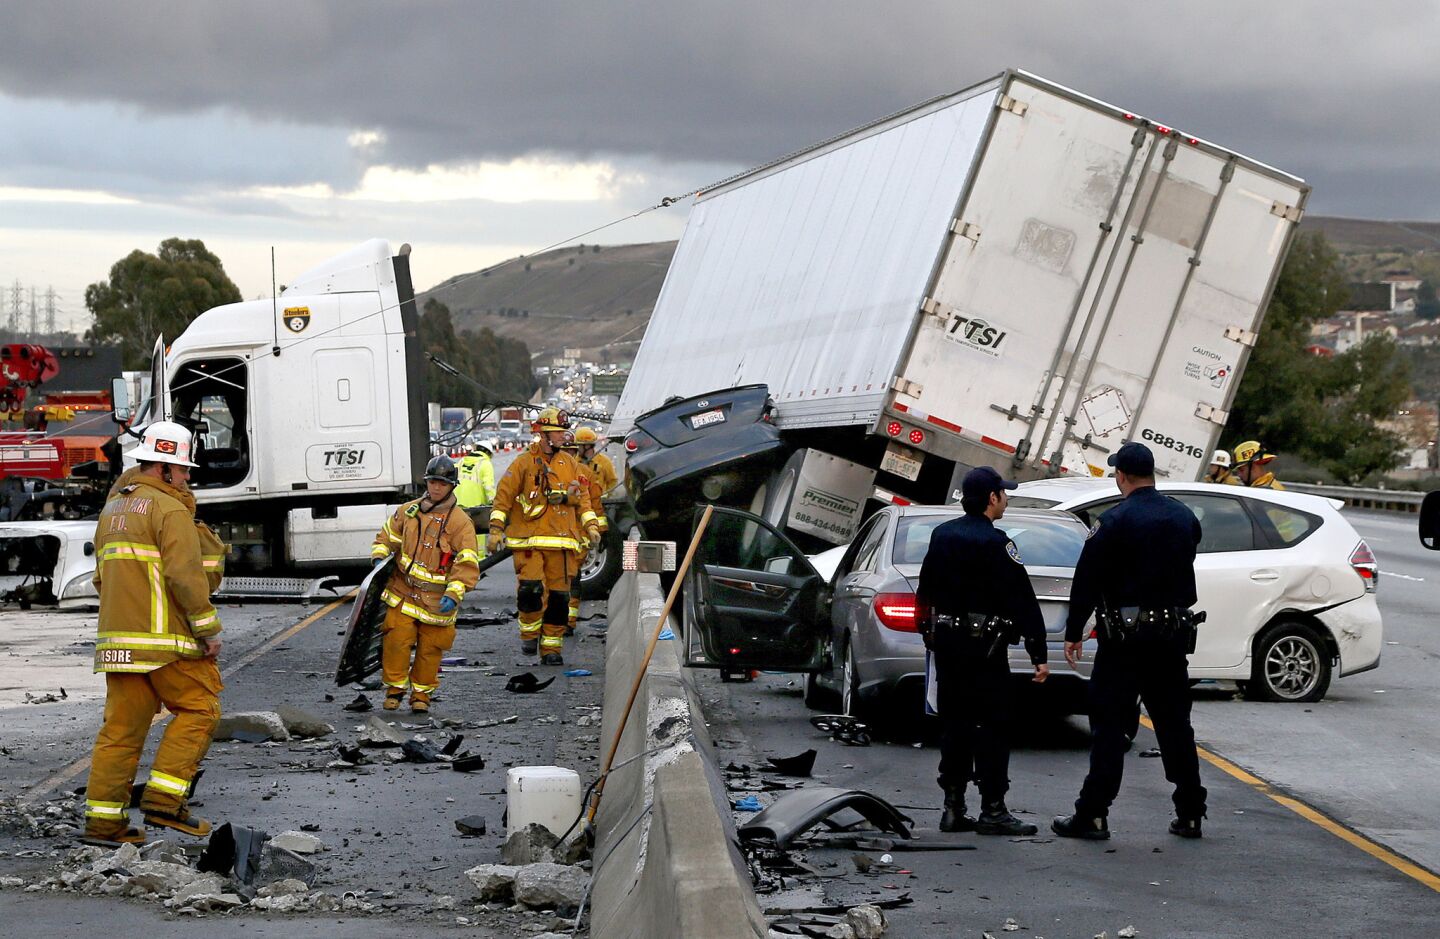 Firefighters and rescue personnel work at the scene after a big rig crashed through the center divider crushing a car underneath and causing four other vehicles to collide on the rain slicked 60 freeway near the Garfield Exit in Monterey Park, Calif.